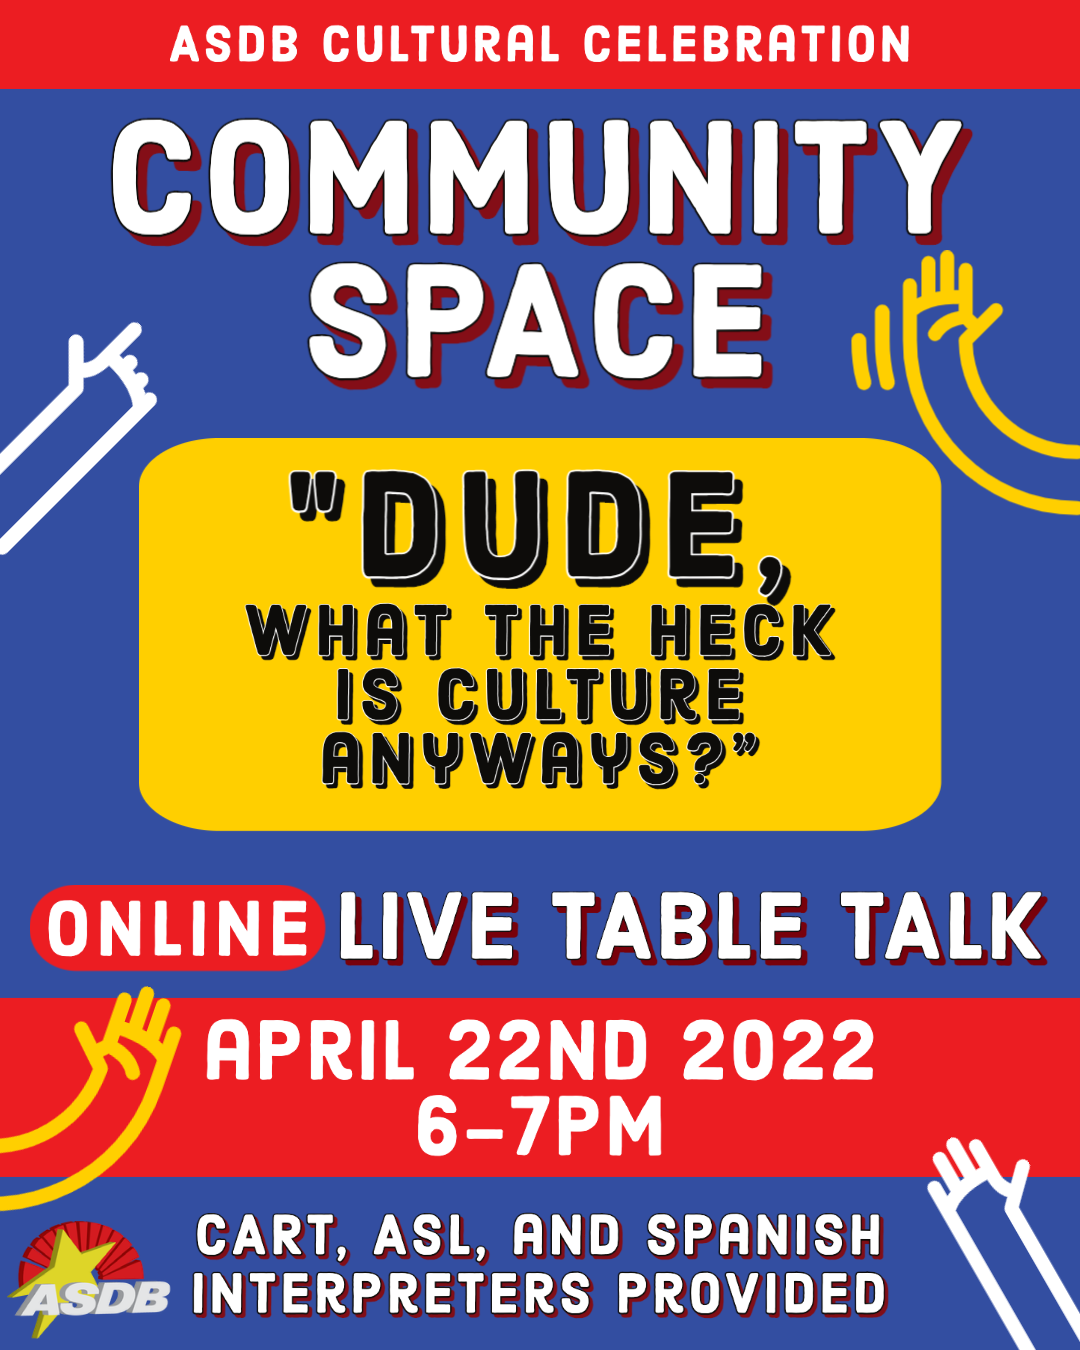 A flyer can be seen with a blue and red background. The ASDB logo can be seen in the bottom right hand corner. Yellow and white hands can be seen on either side of the flyer. Text from top to bottom reads, "ASDB Cultural Celebration. Community Space." "Dude, what the heck is culture anyways?" " Online live table talk. April 22nd 2022 6-7PM. CART, ASL, and Spanish interpreters provided."